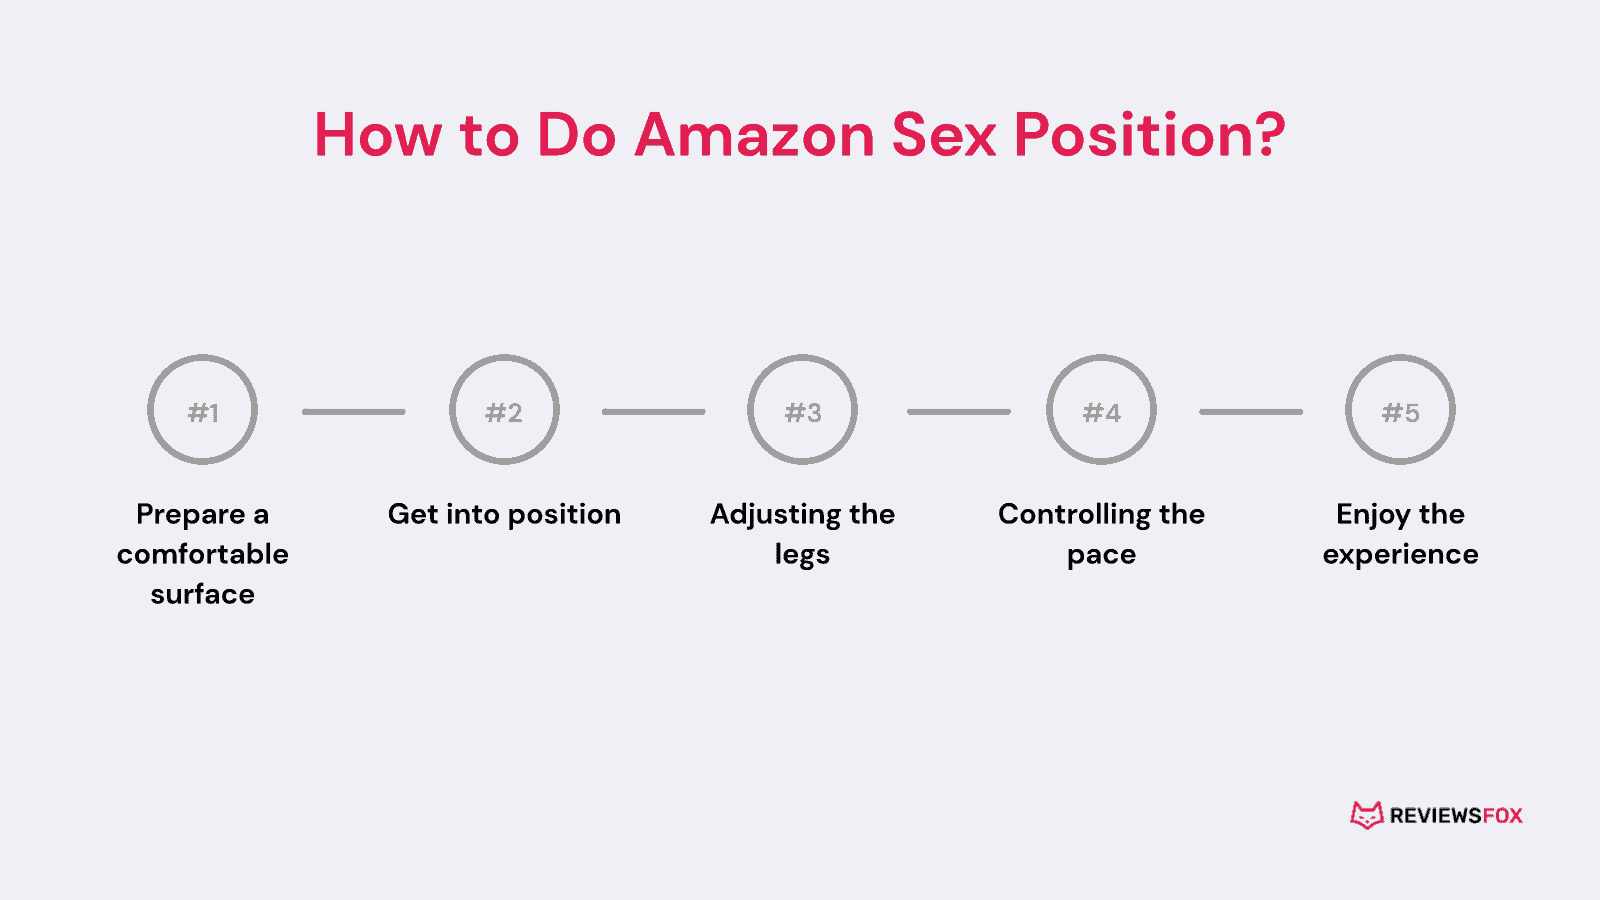 How to do Amazon sex position